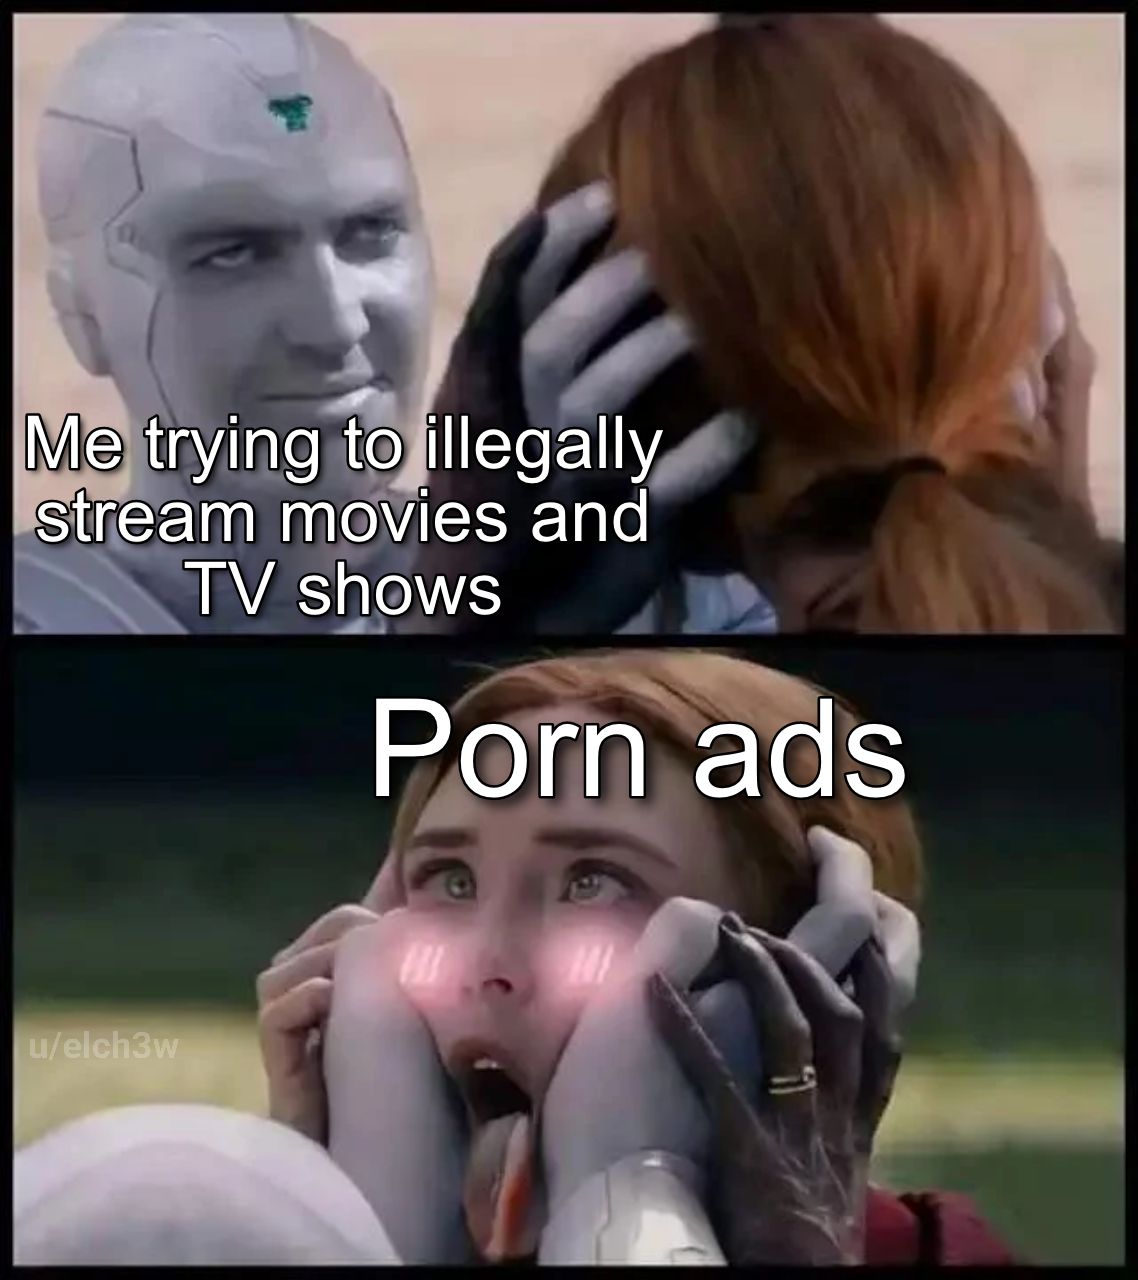 Just let me watch my show